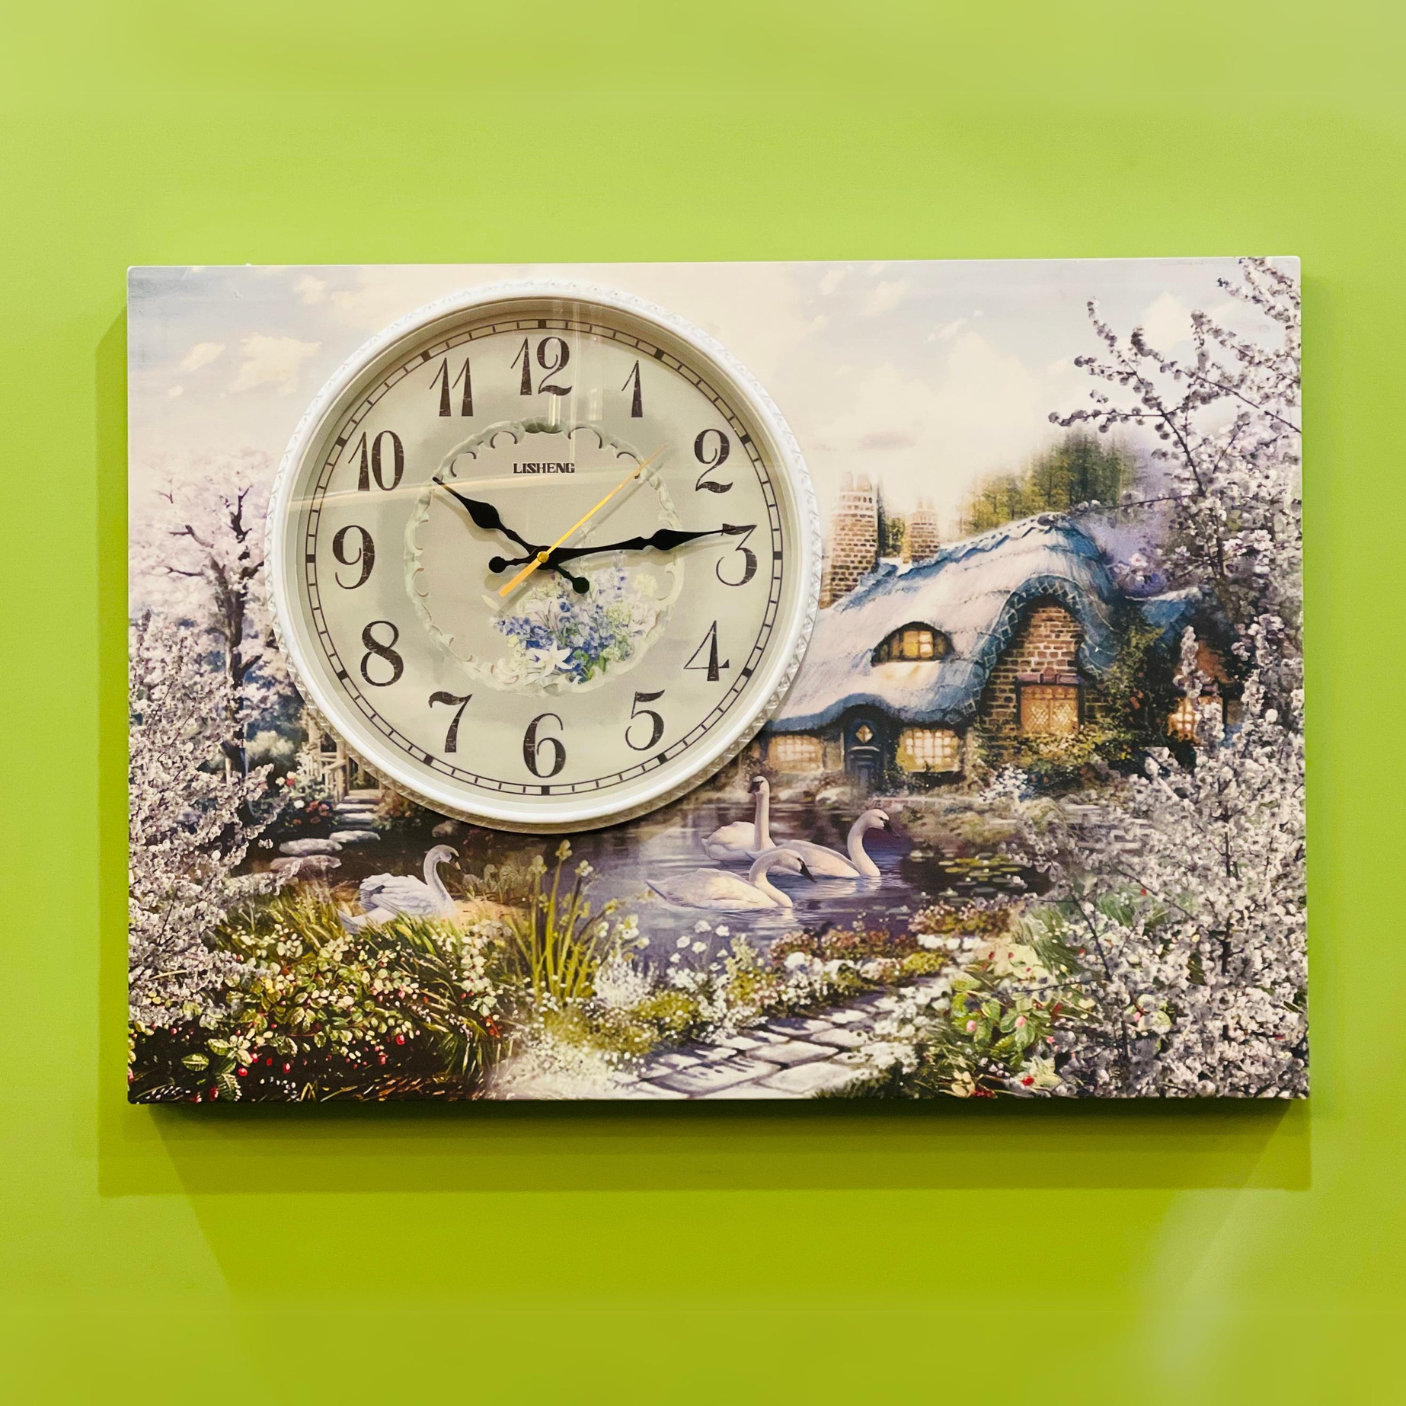 CHARLING WALL CLOCK WITH SCENERY ART FRAME